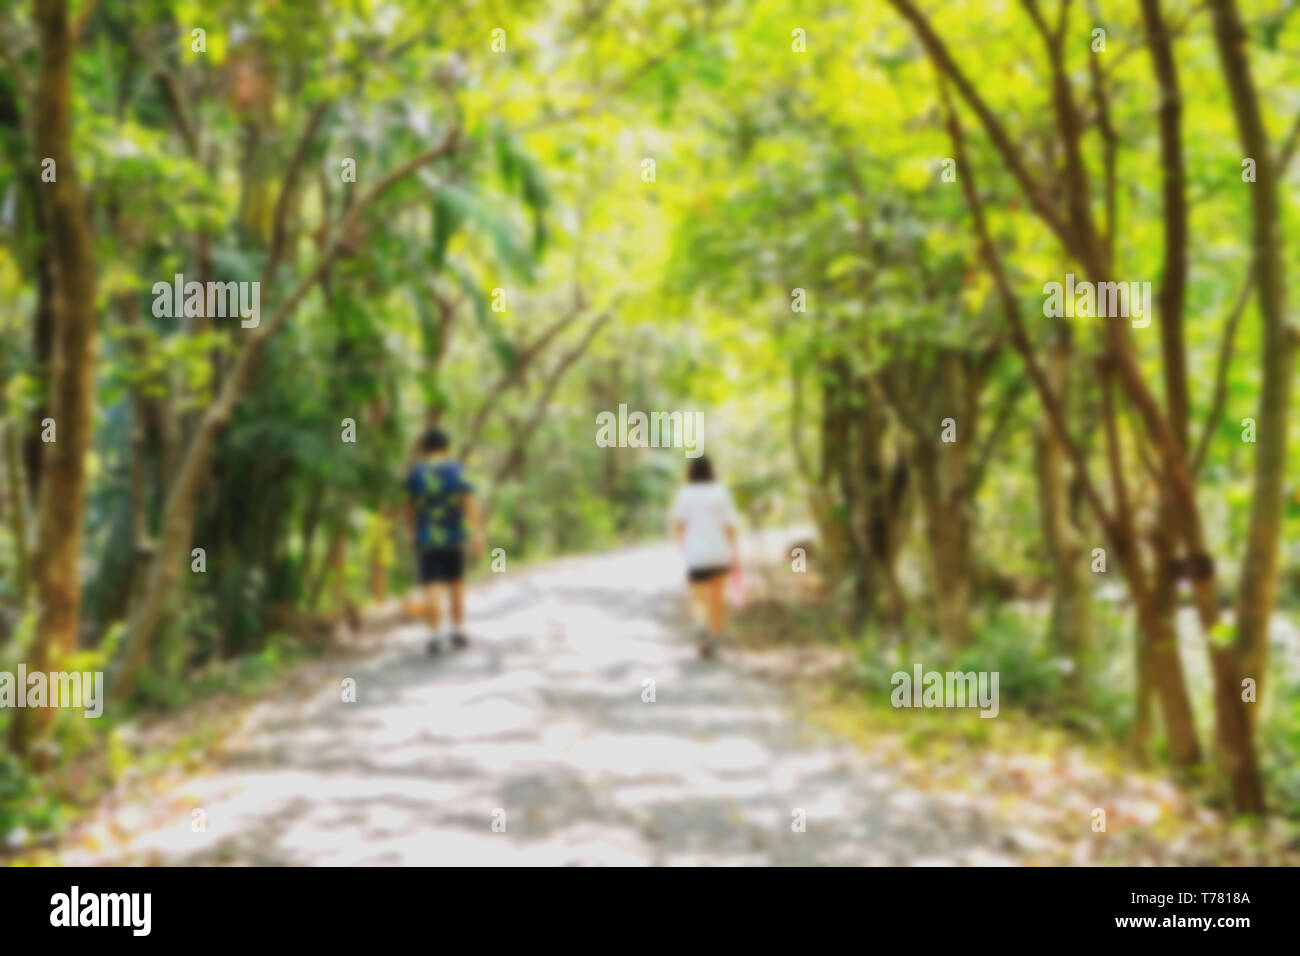 Blurred nature background of two people walking along the pathway in the park, surrounded by lush green trees in summer with natural sunlight. Stock Photo